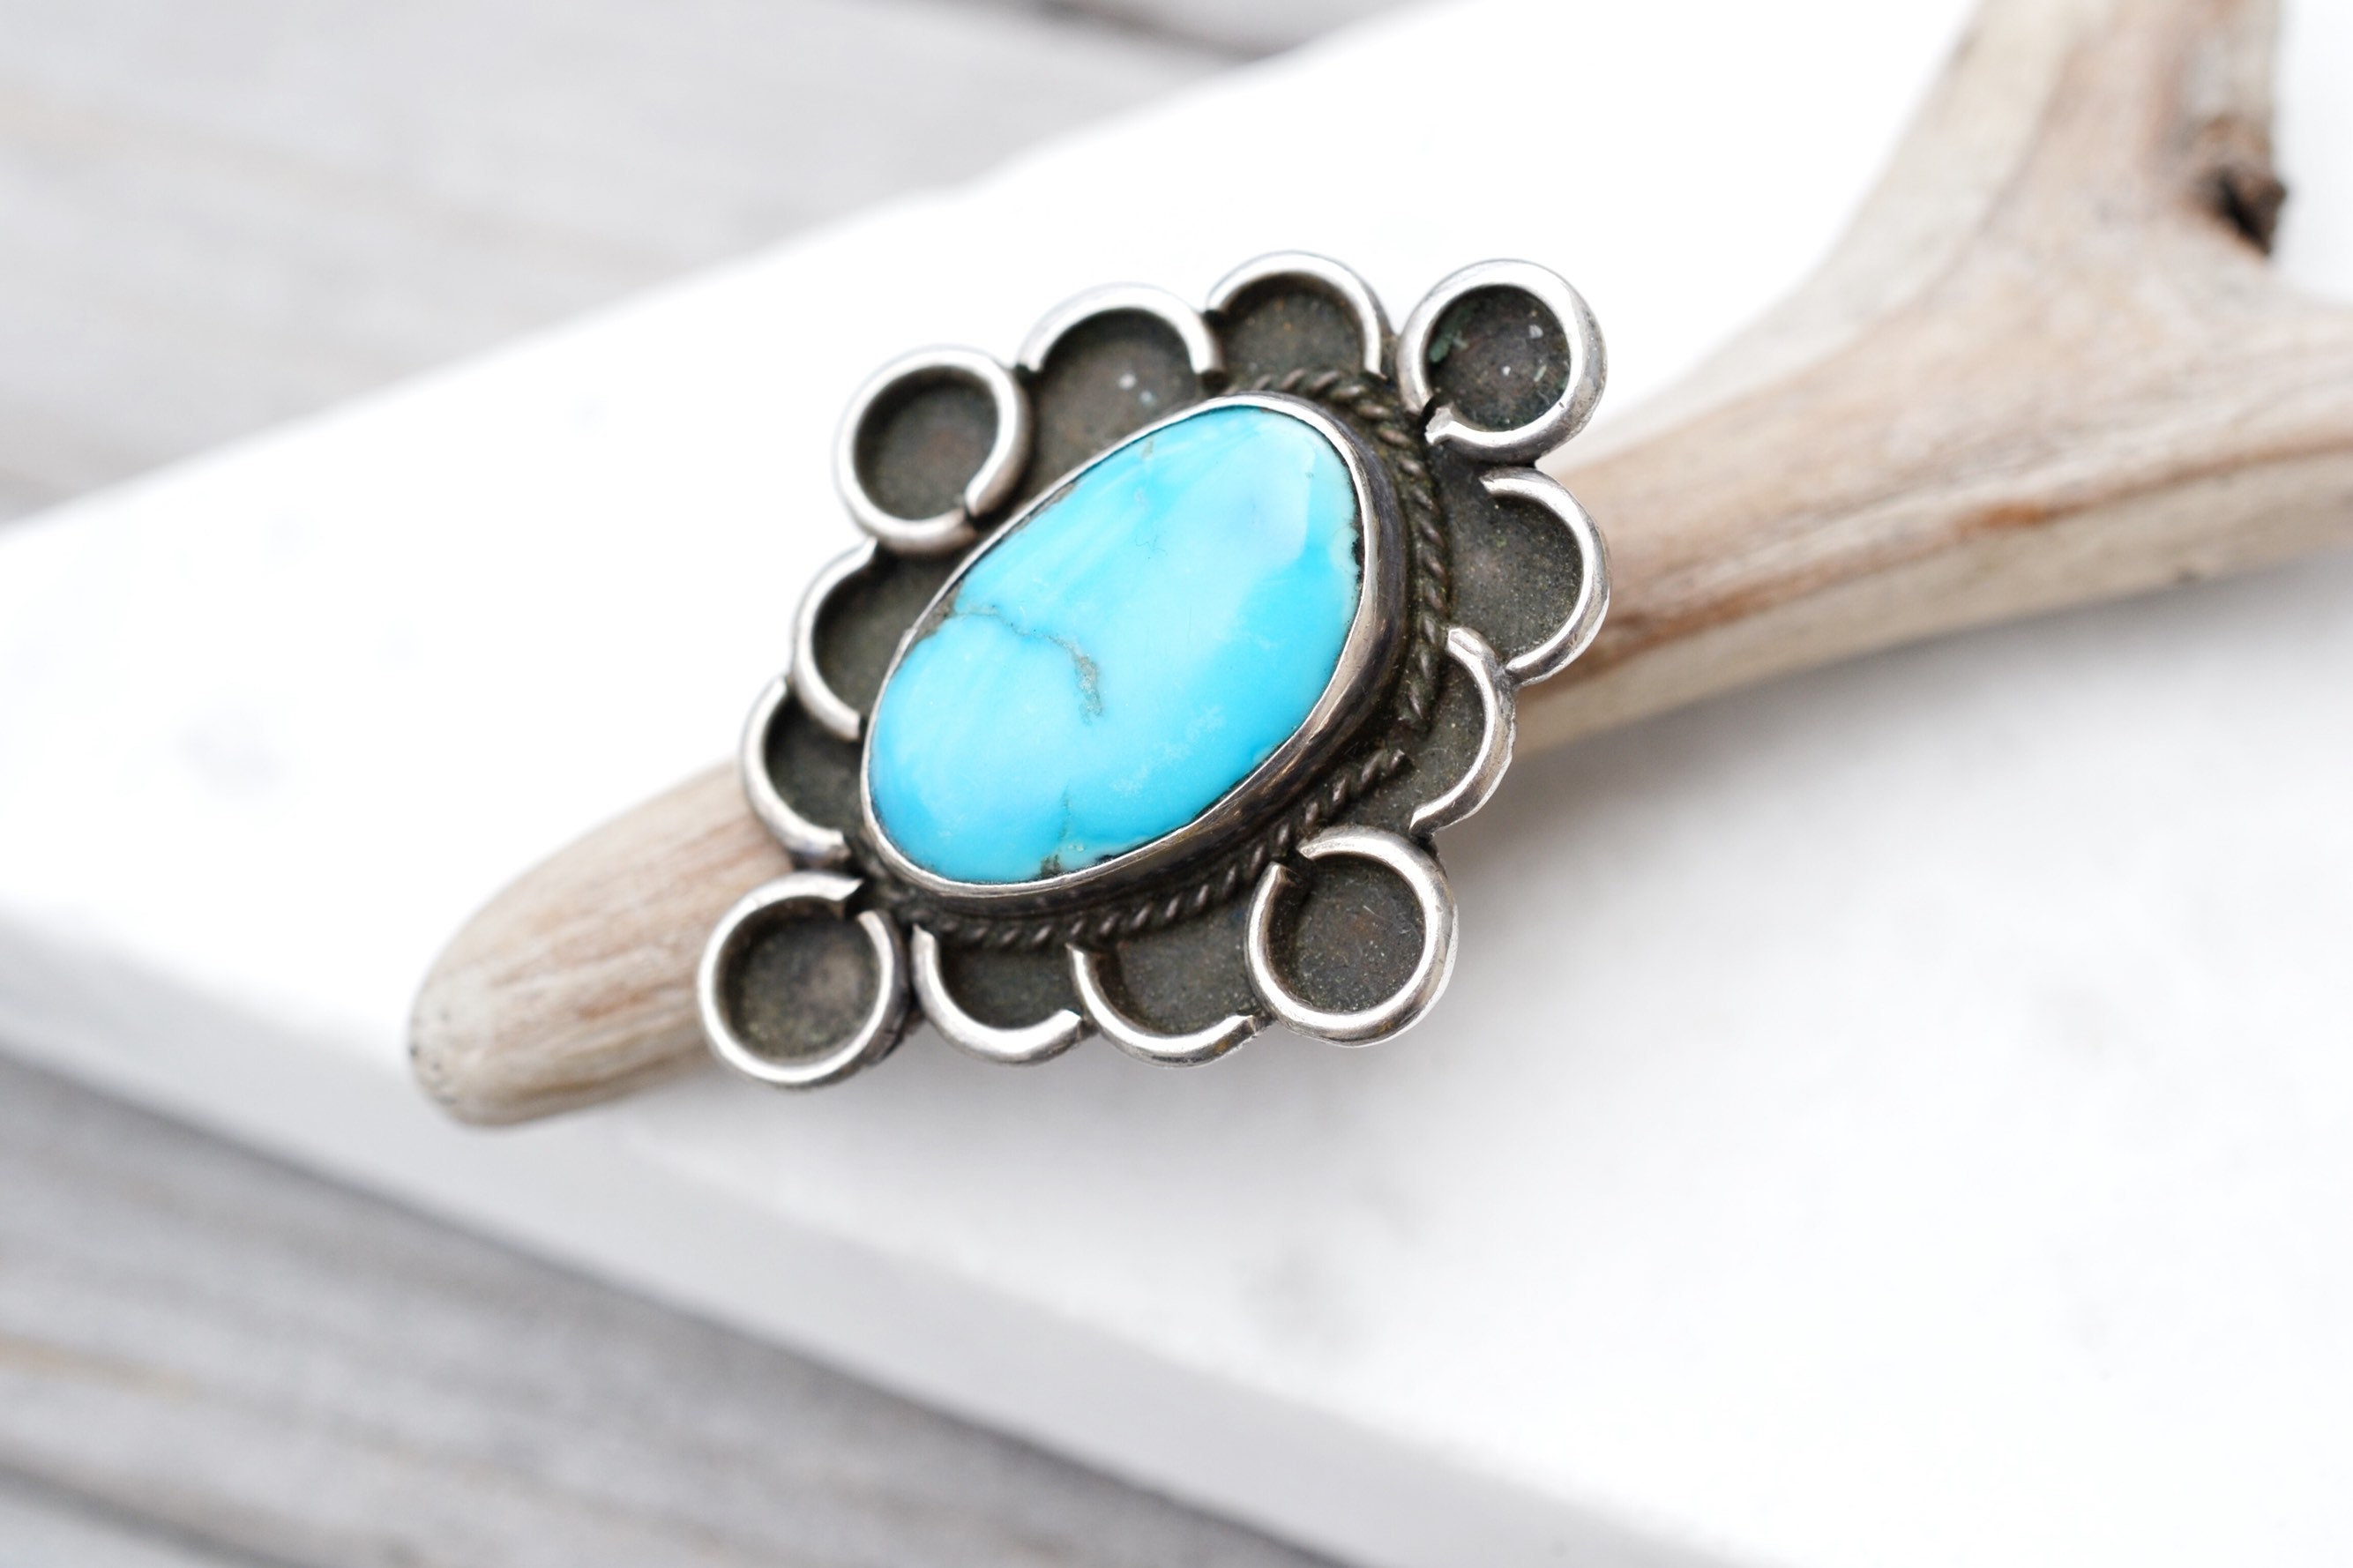 Vintage Native American Navajo Styled Sterling and Turquoise Ring 8-12 US Ring Size